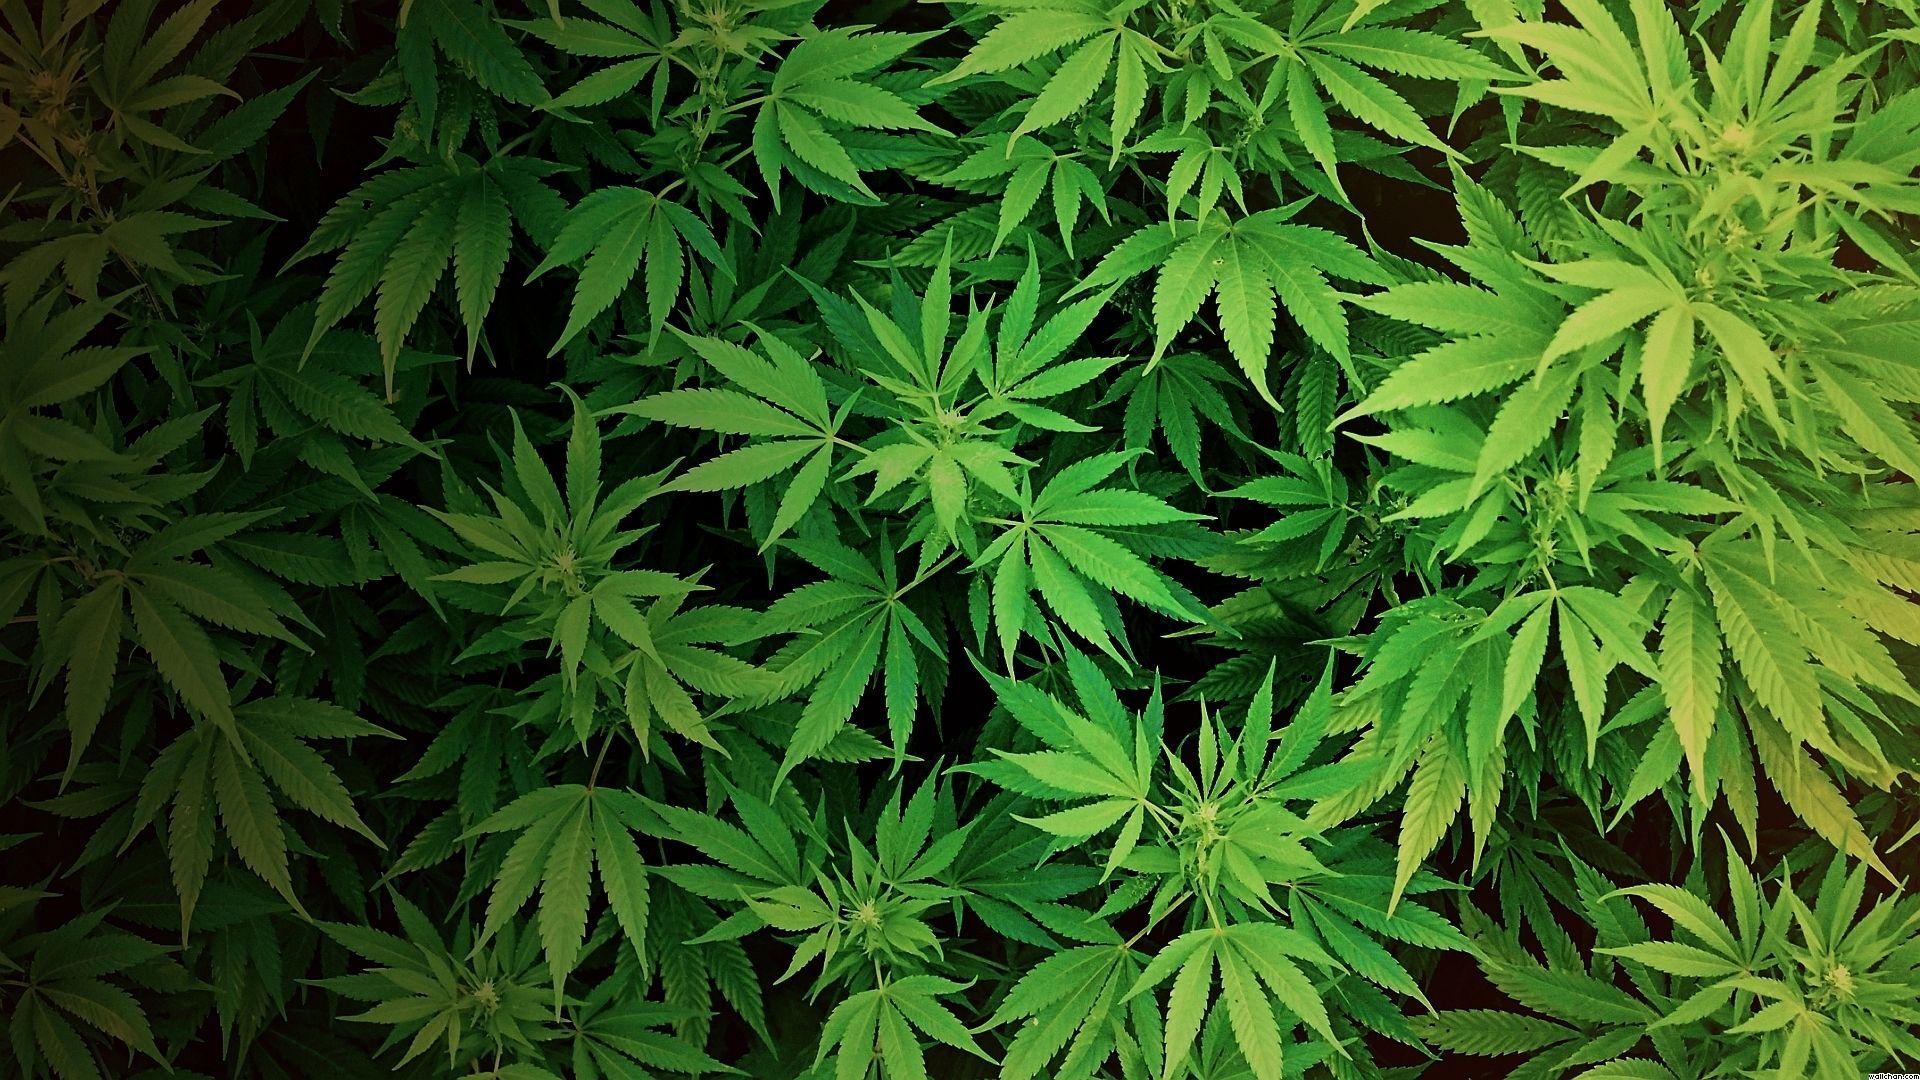 What Is Your 80's Anthem?. Weed background, Weed pics and Cannabis